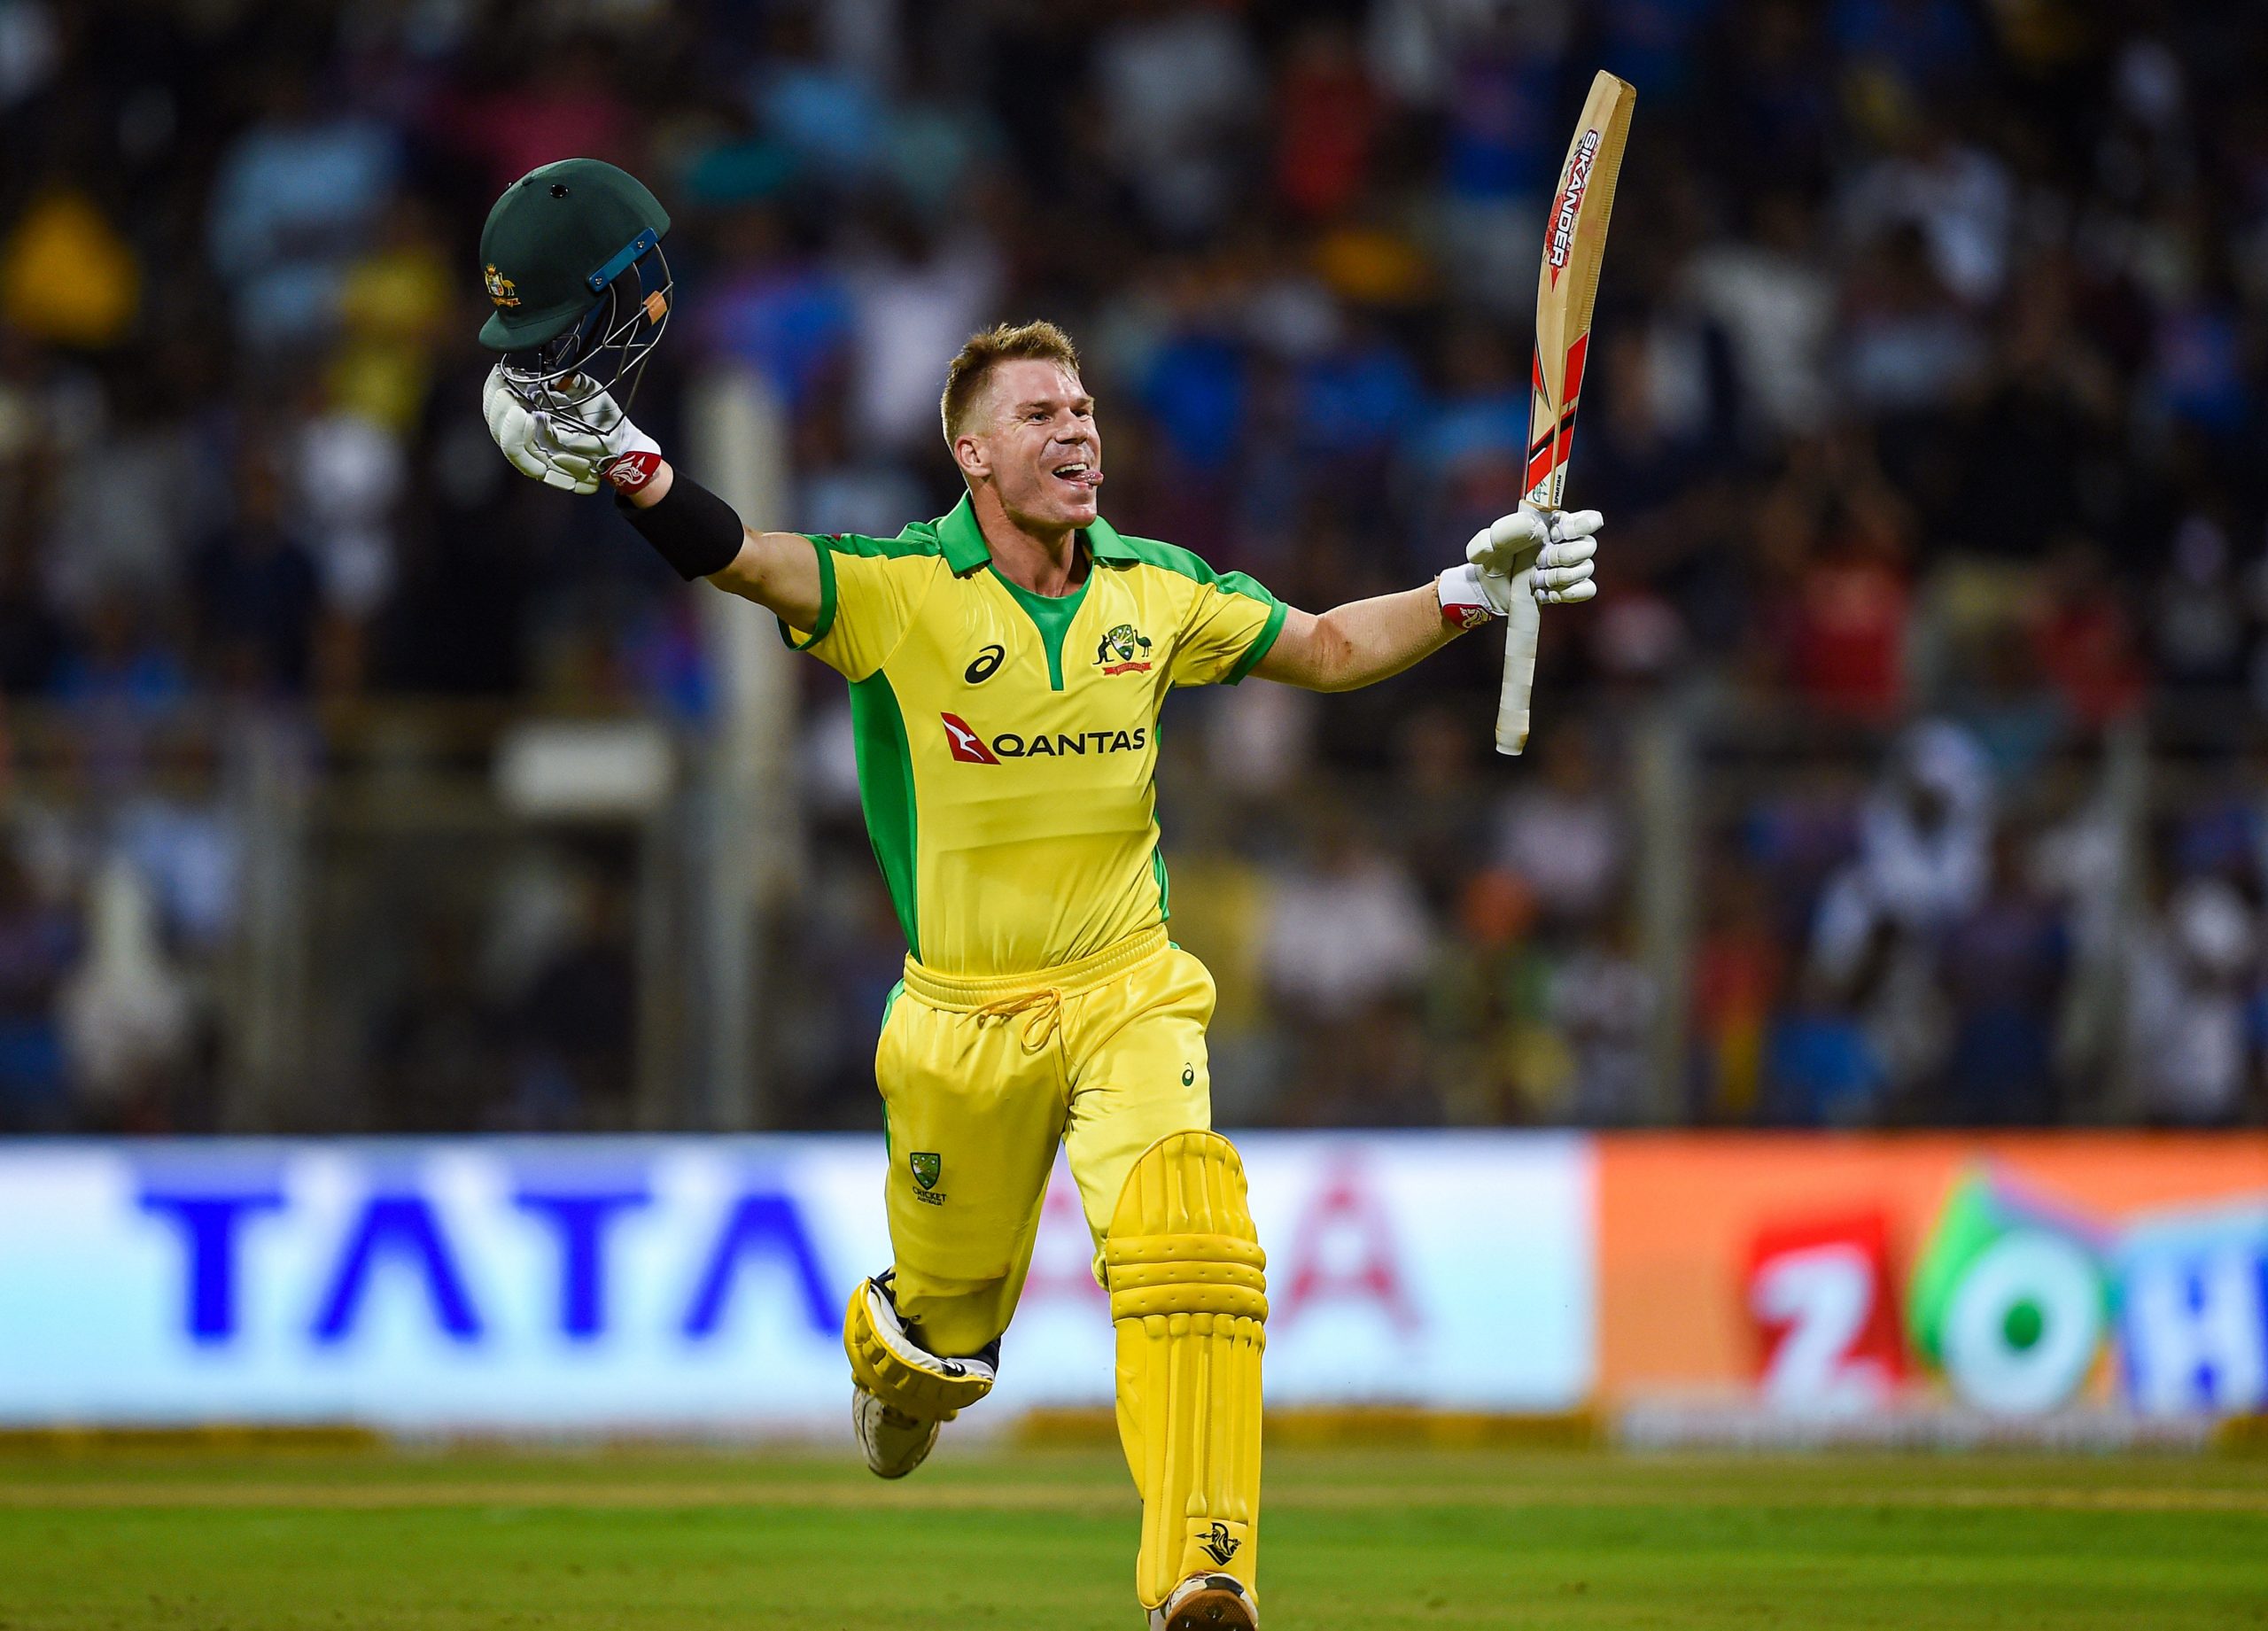 All you need to know about the lifetime captaincy ban on David Warner